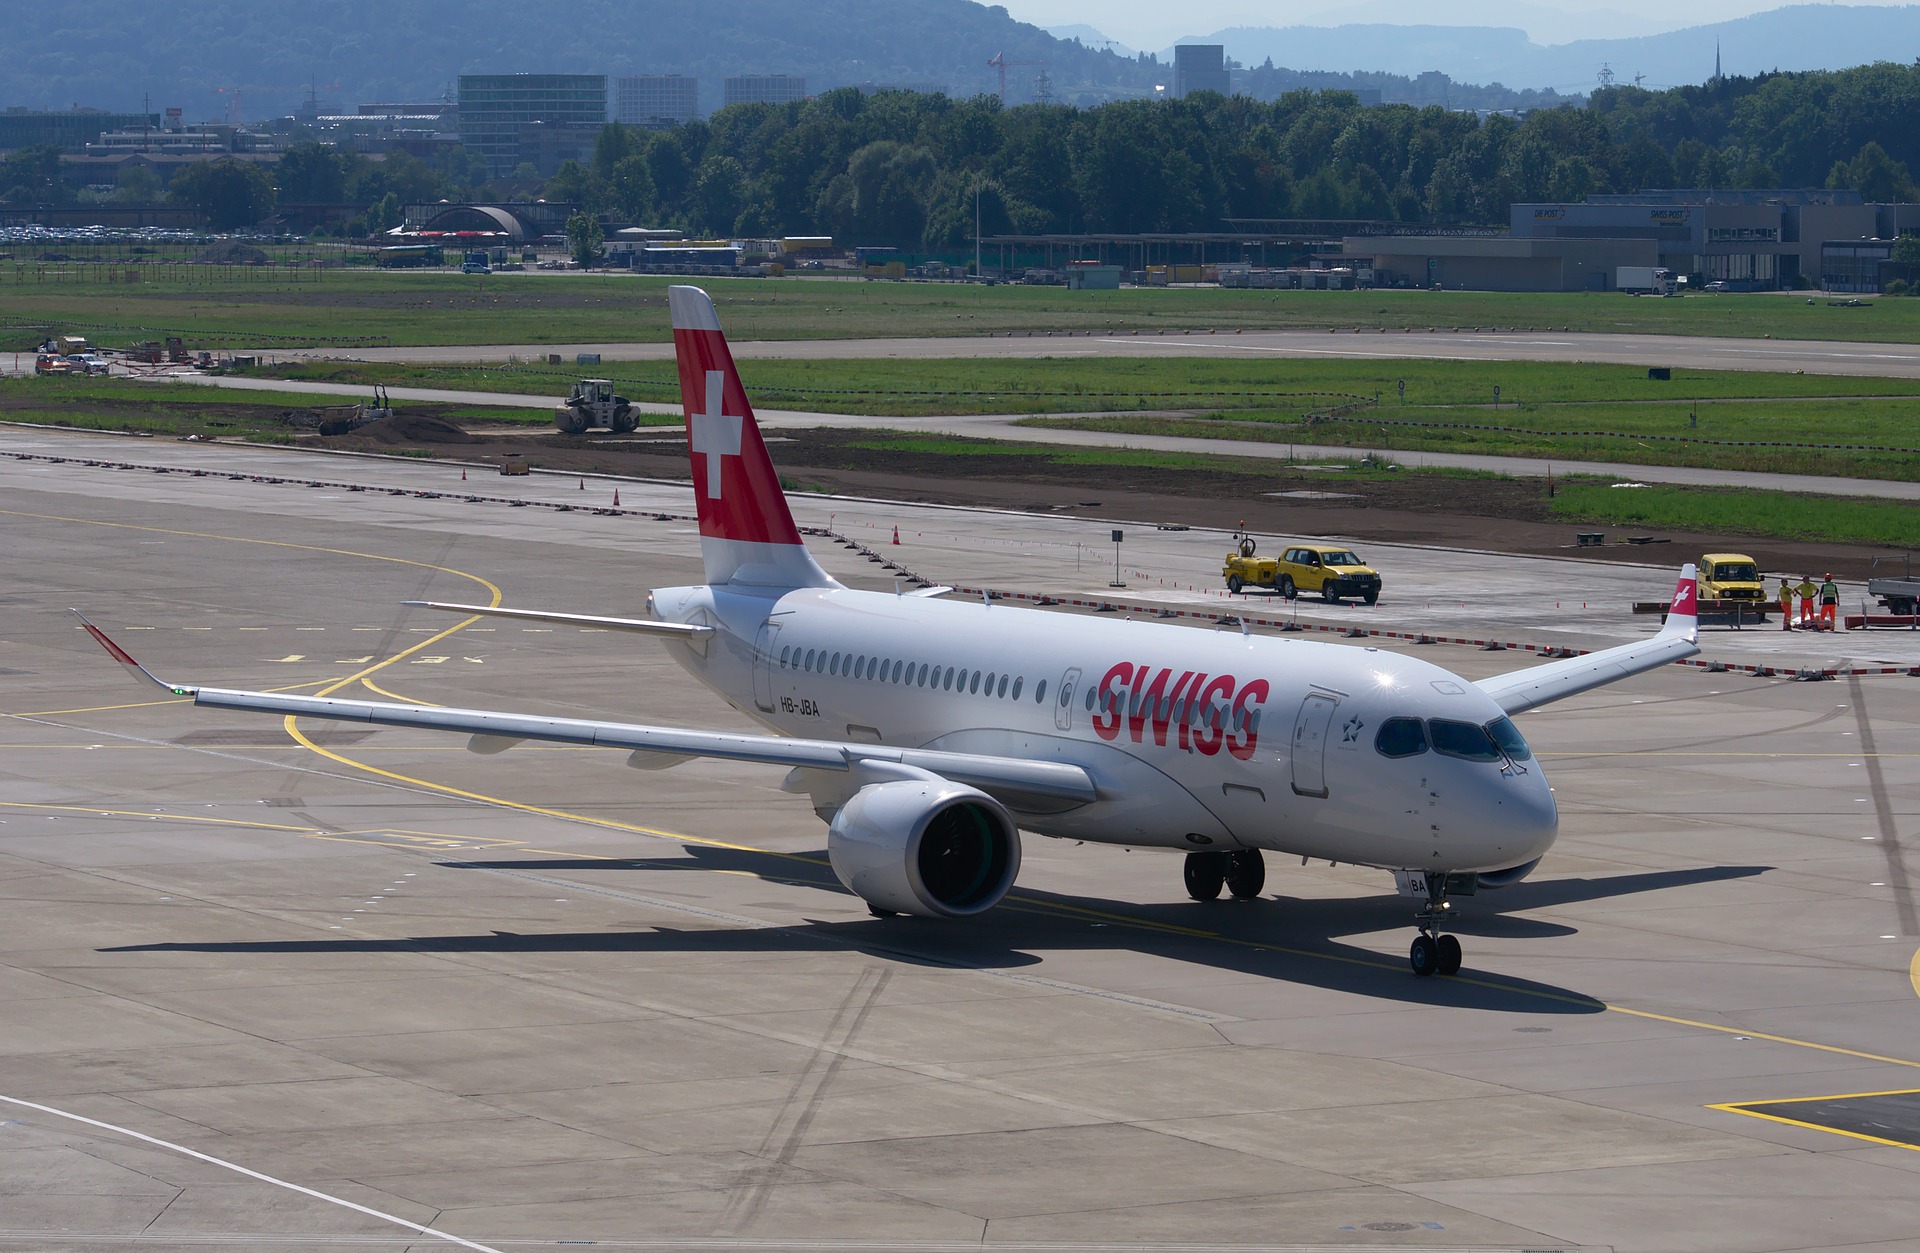 SWISS airlines will implement “Premium Economy” category